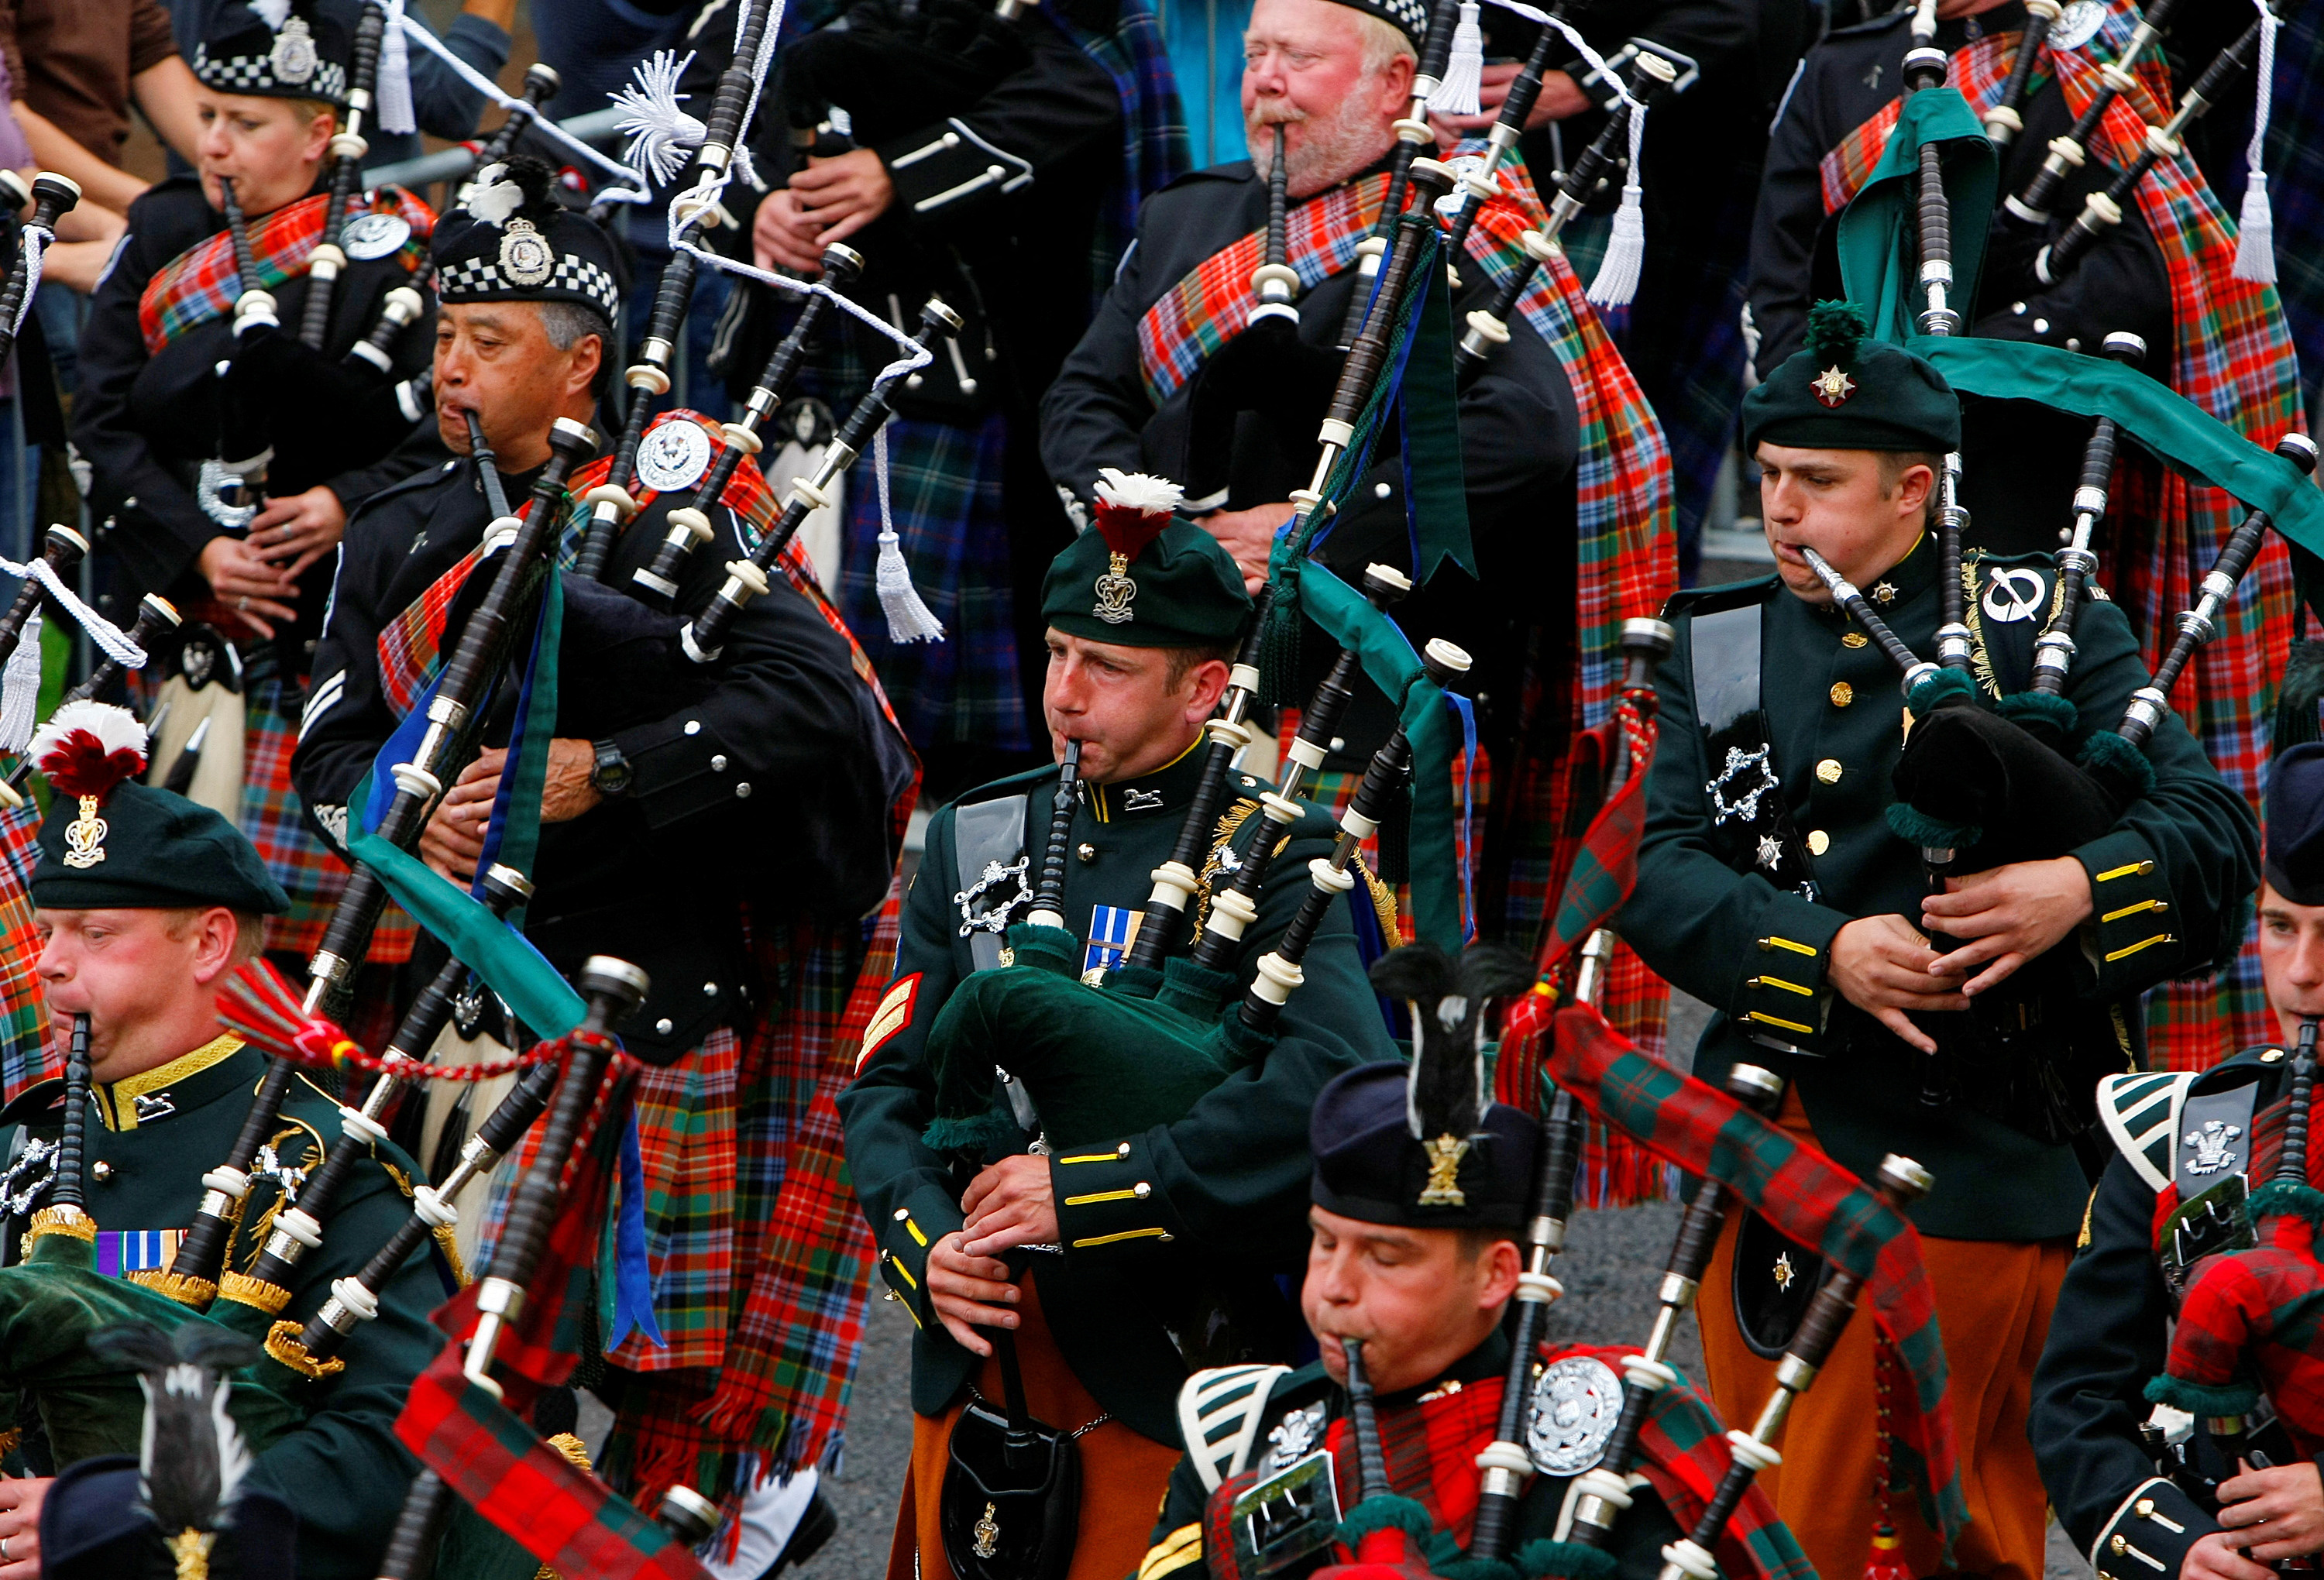 Pipers from the Edinburgh Military Tattoo Massed Pipes and Drums perform during the Edinburgh Fringe Festival parade in Holyrood Park in Edinburgh, Scotland